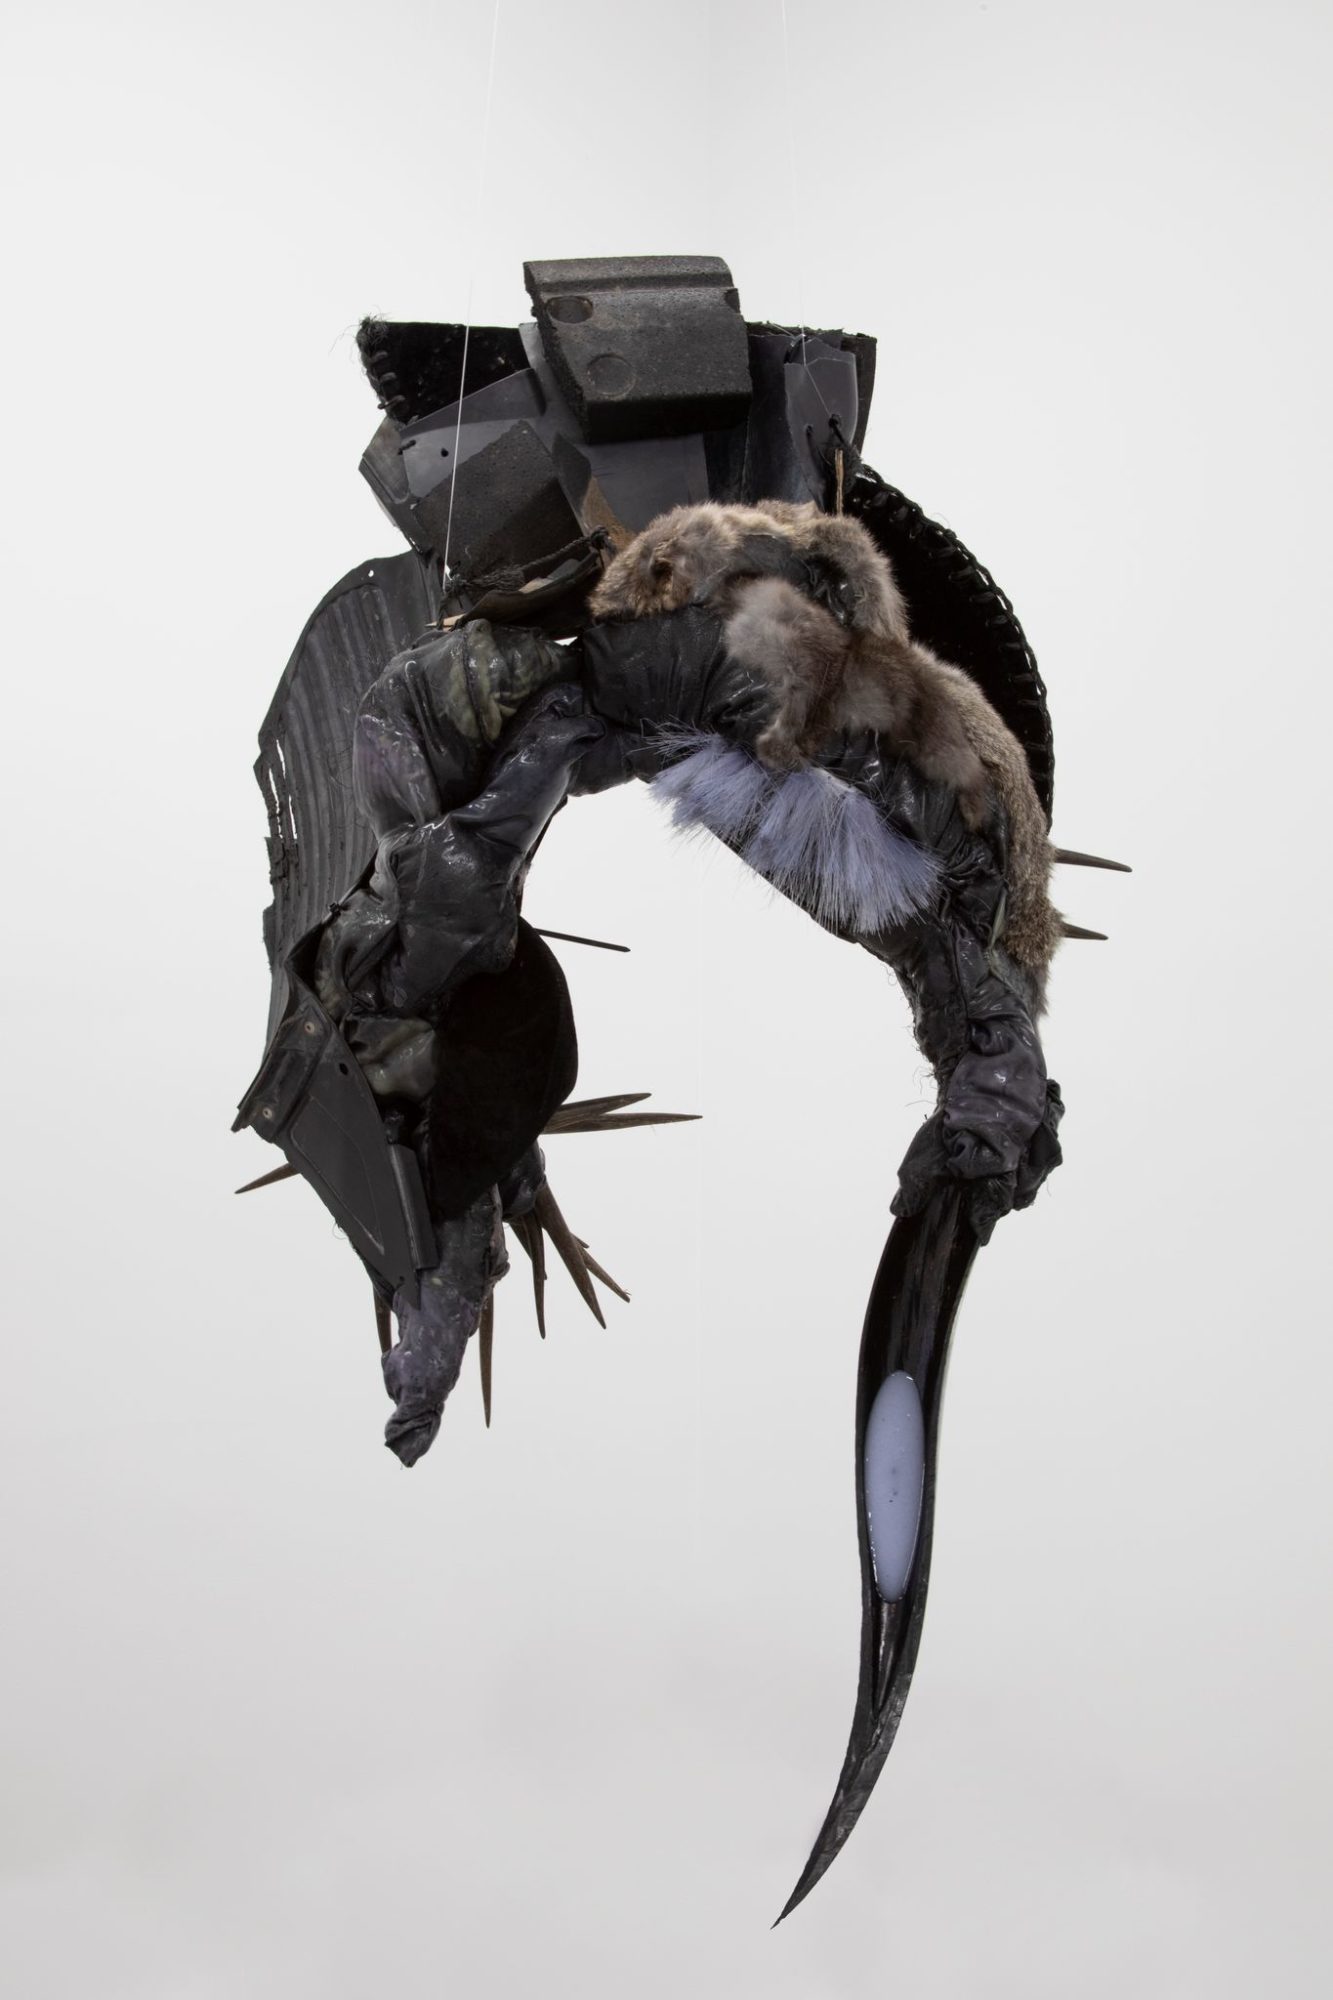 A grey and black animal-like sculpture hangs suspended by strings.